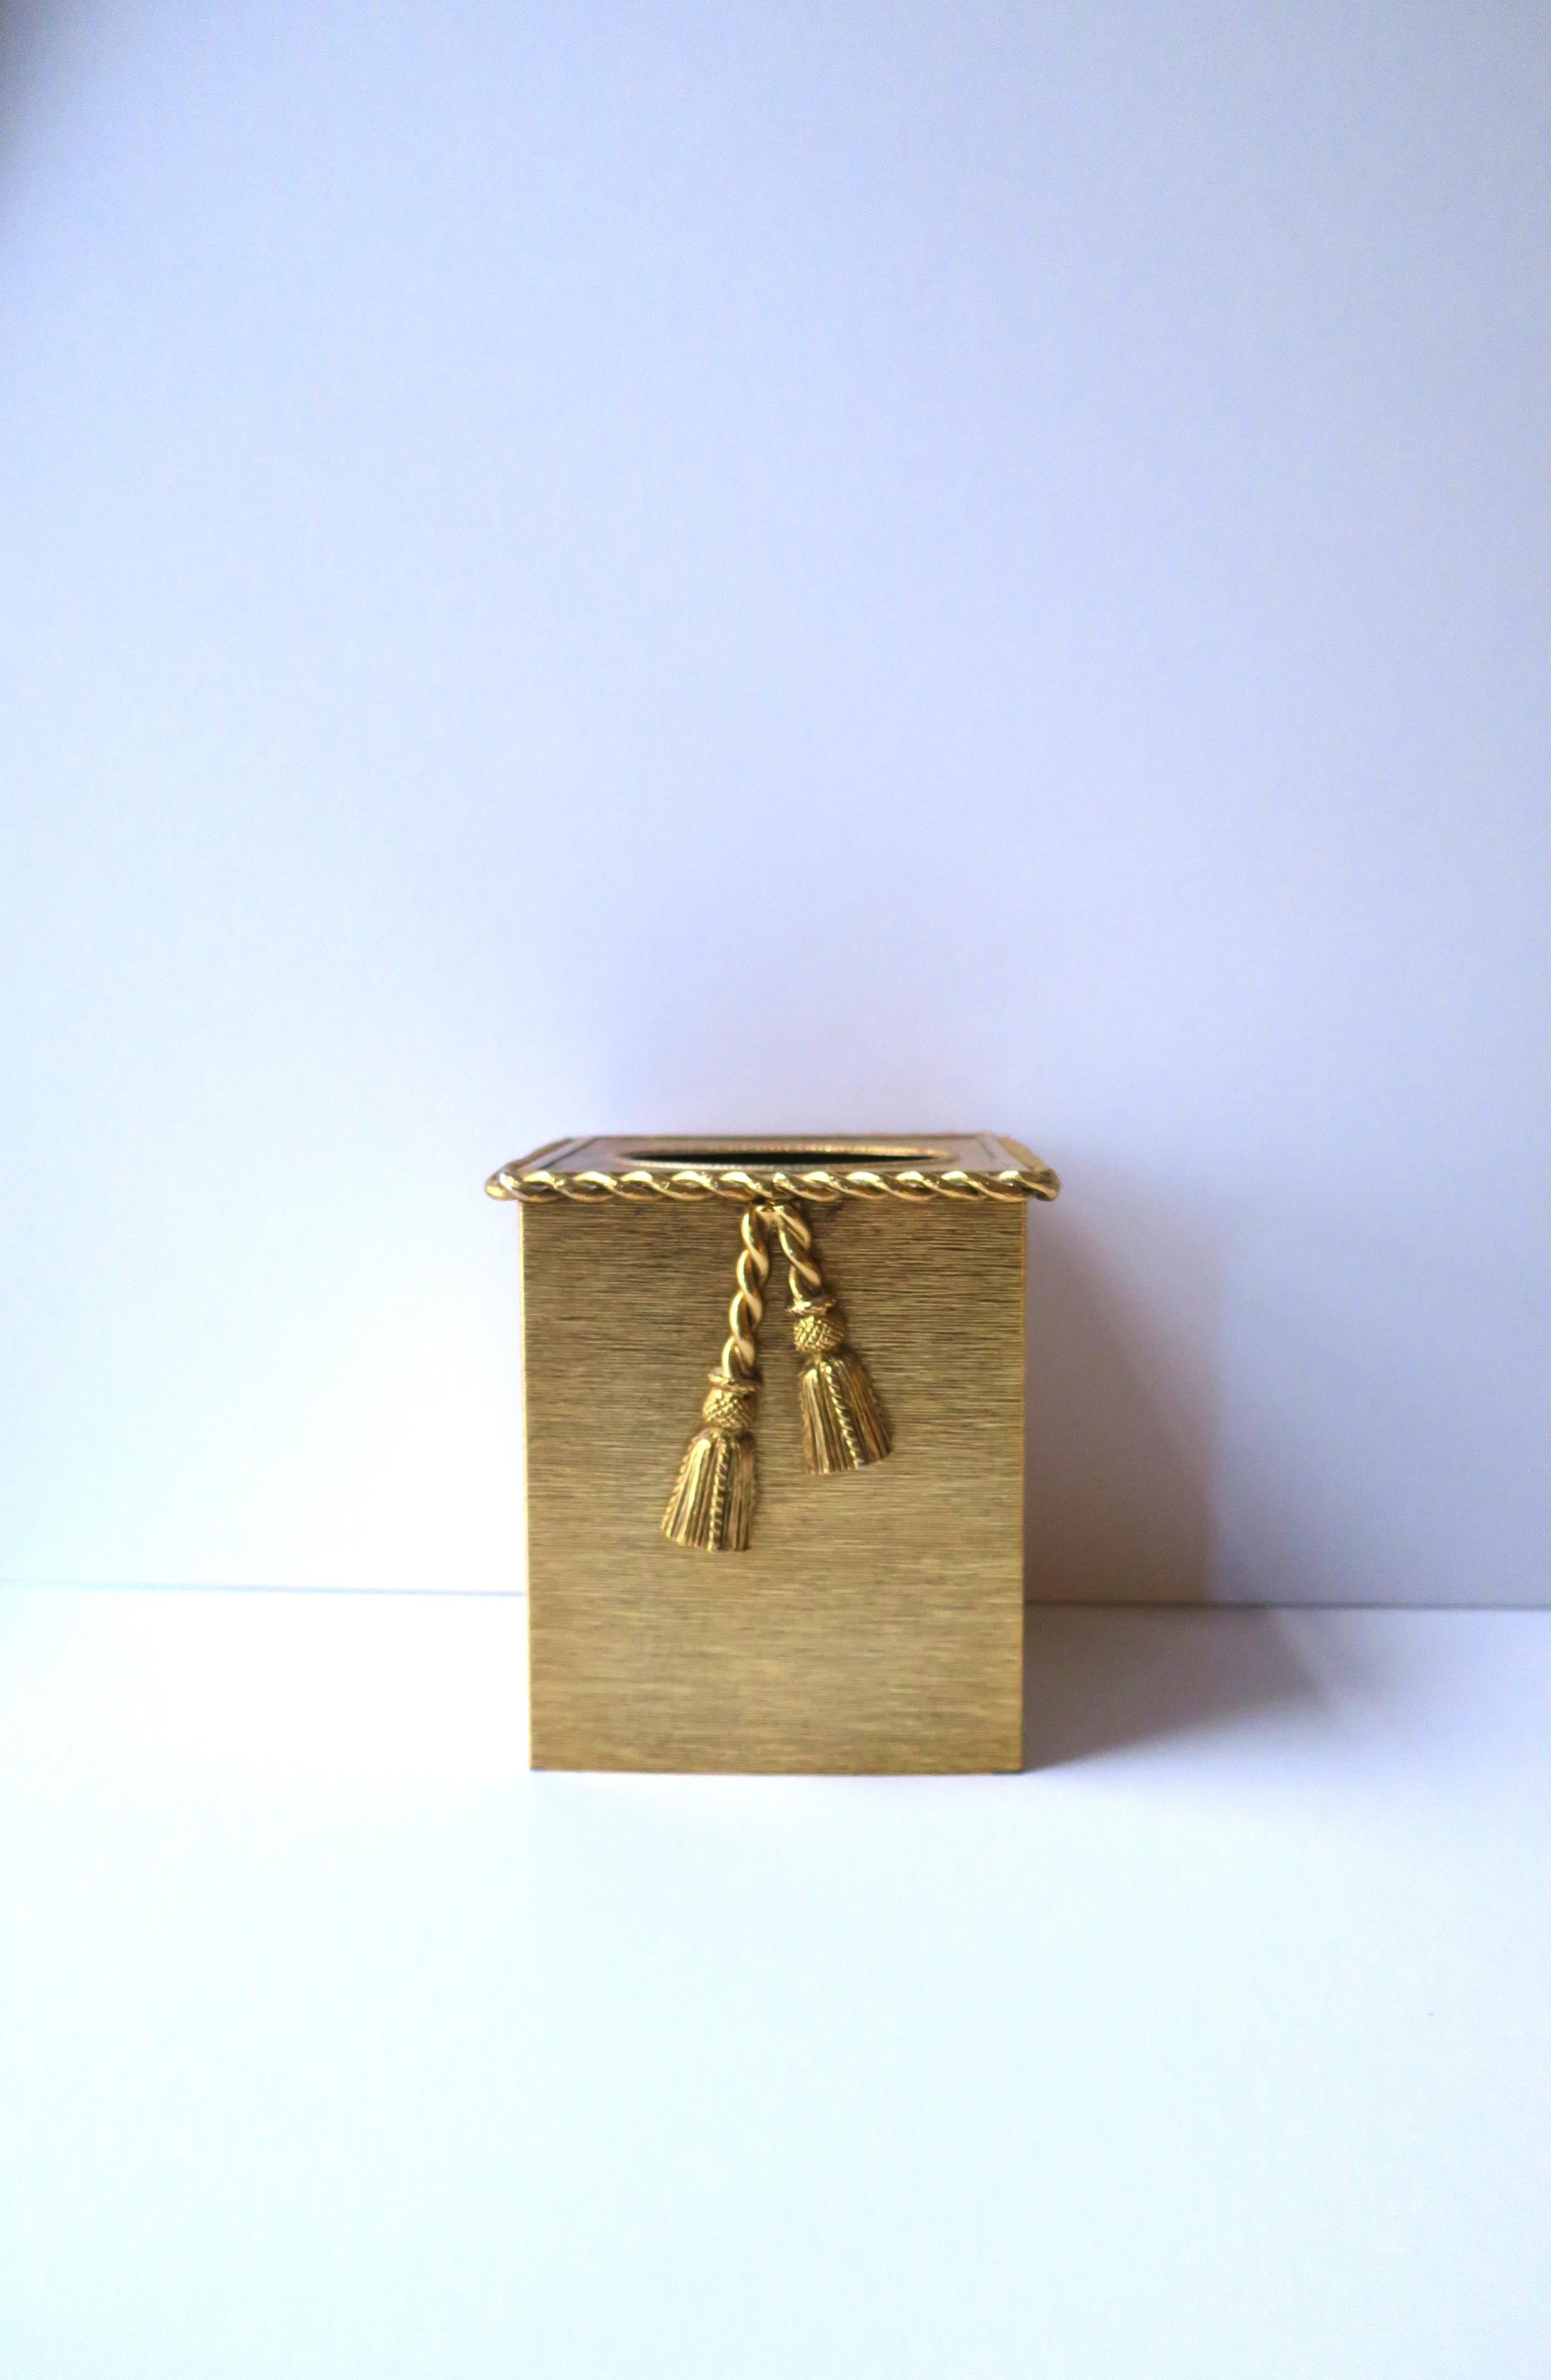 Gold Tissue Box Cover with Rope and Tassel Design In Good Condition For Sale In New York, NY